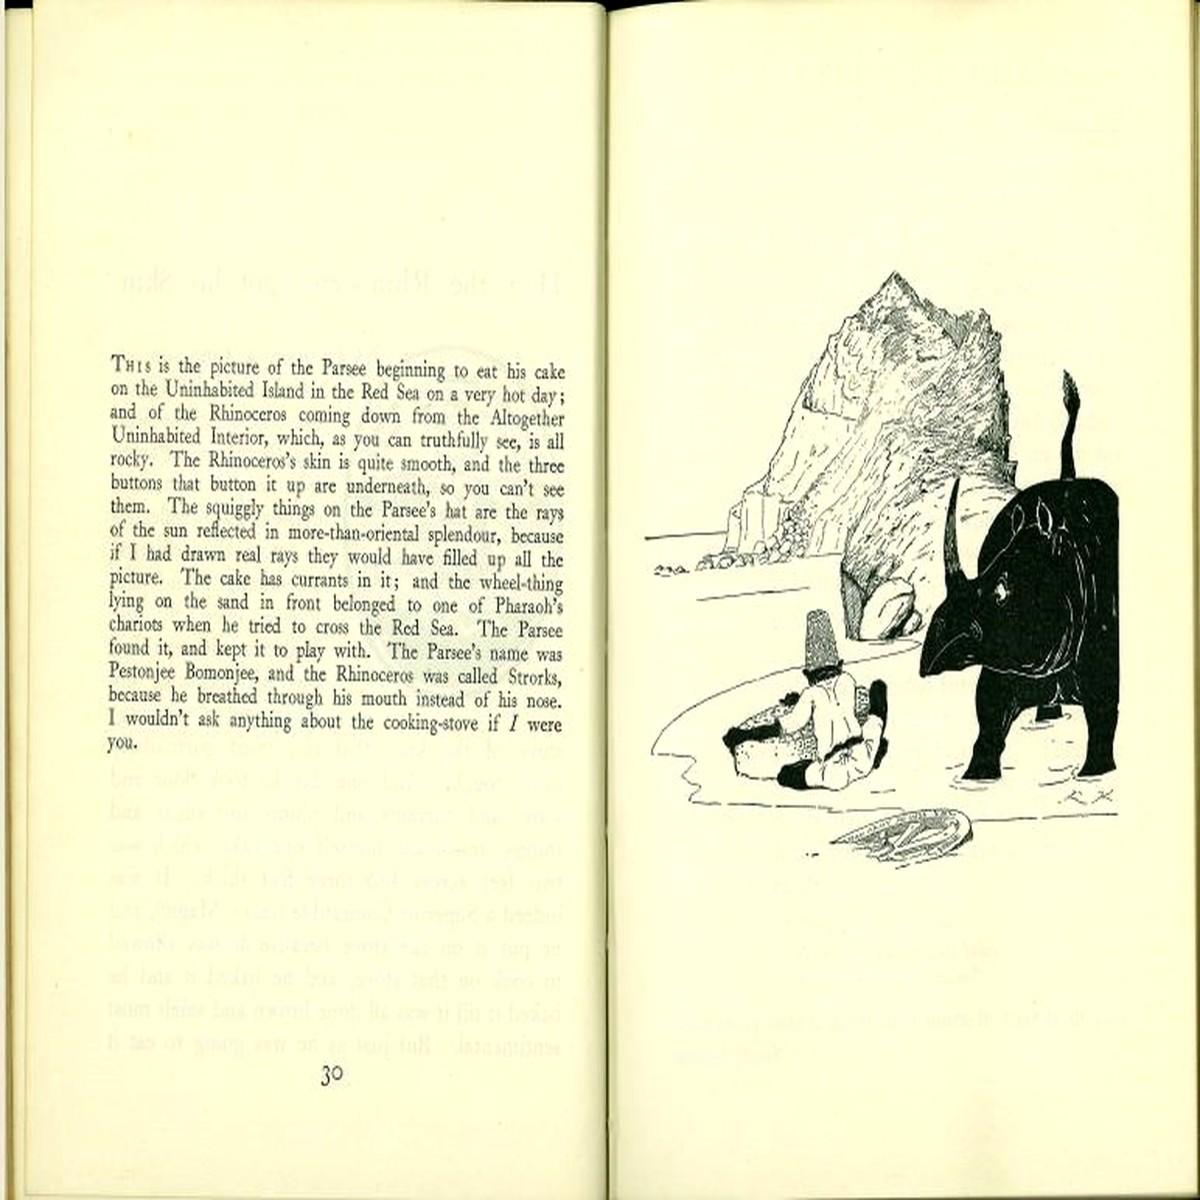 rudyard-kipling-a-parsi-and-his-fantasy-tale-of-the-rhinocerous